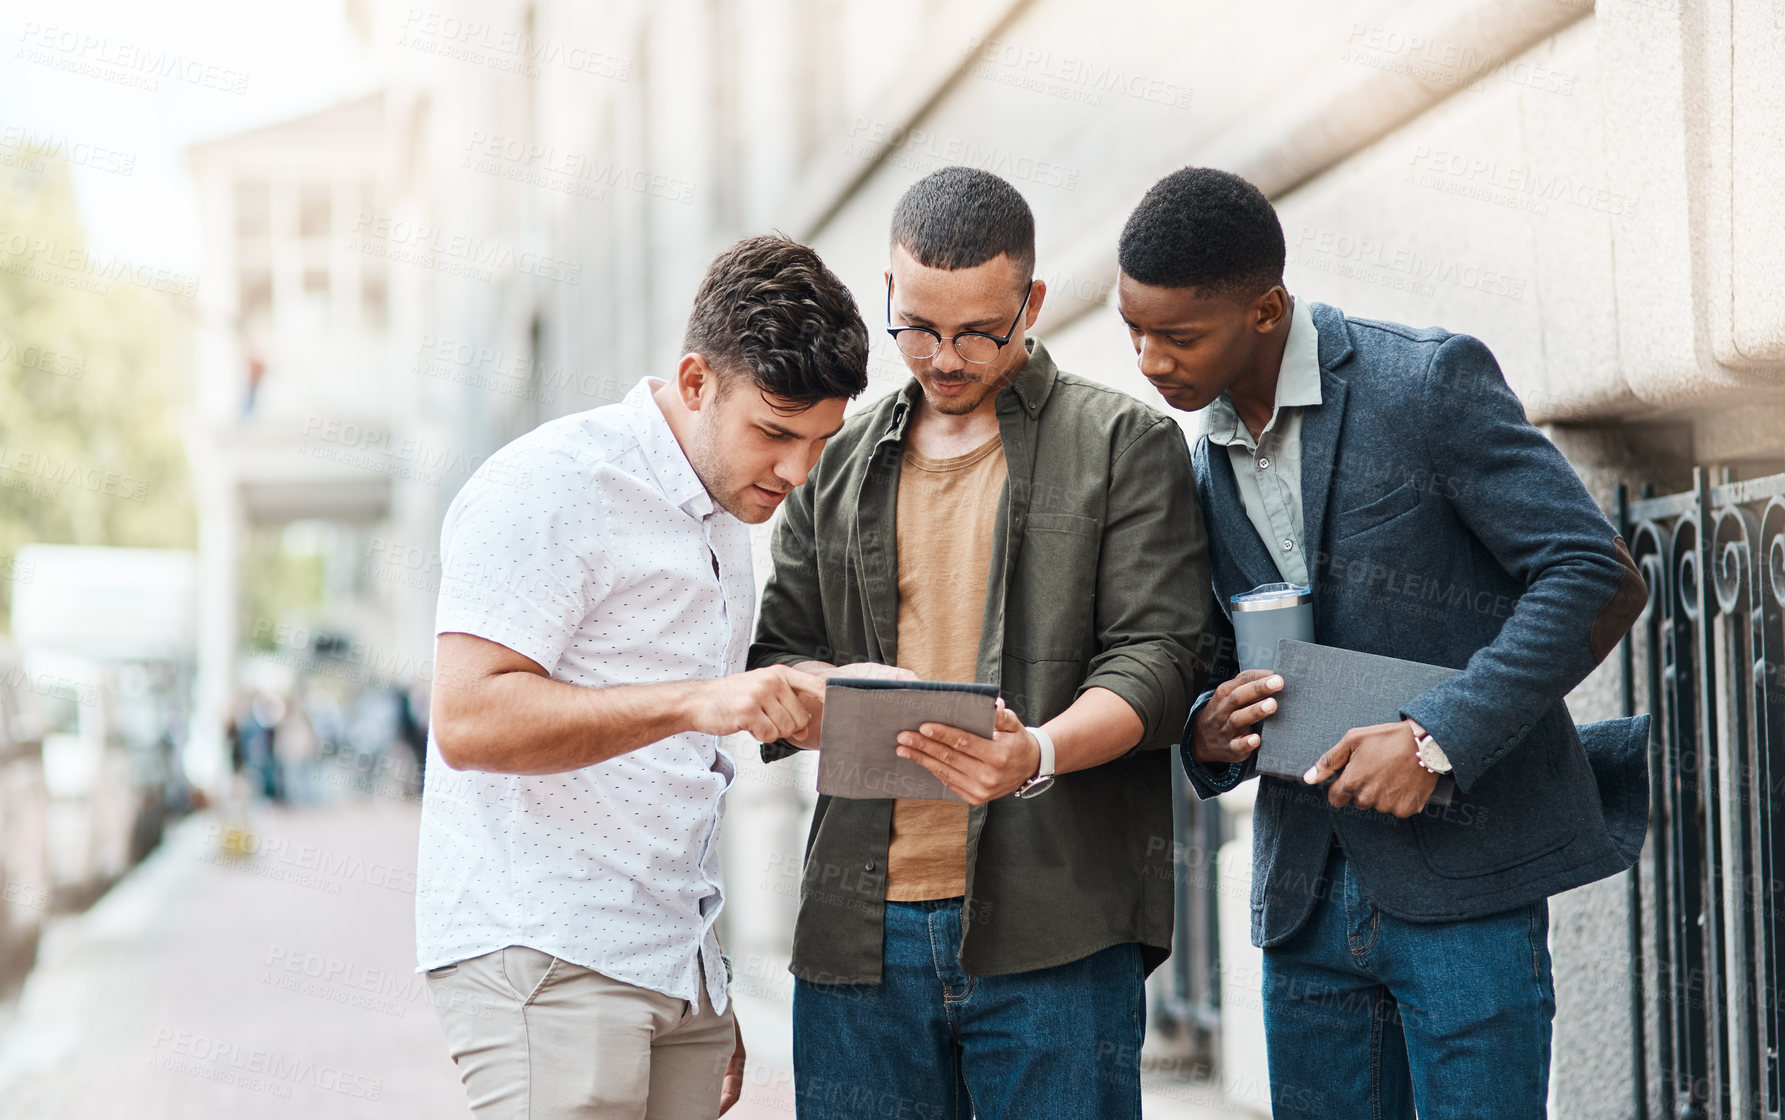 Buy stock photo Shot of a group young businessmen using a digital tablet together against an urban background